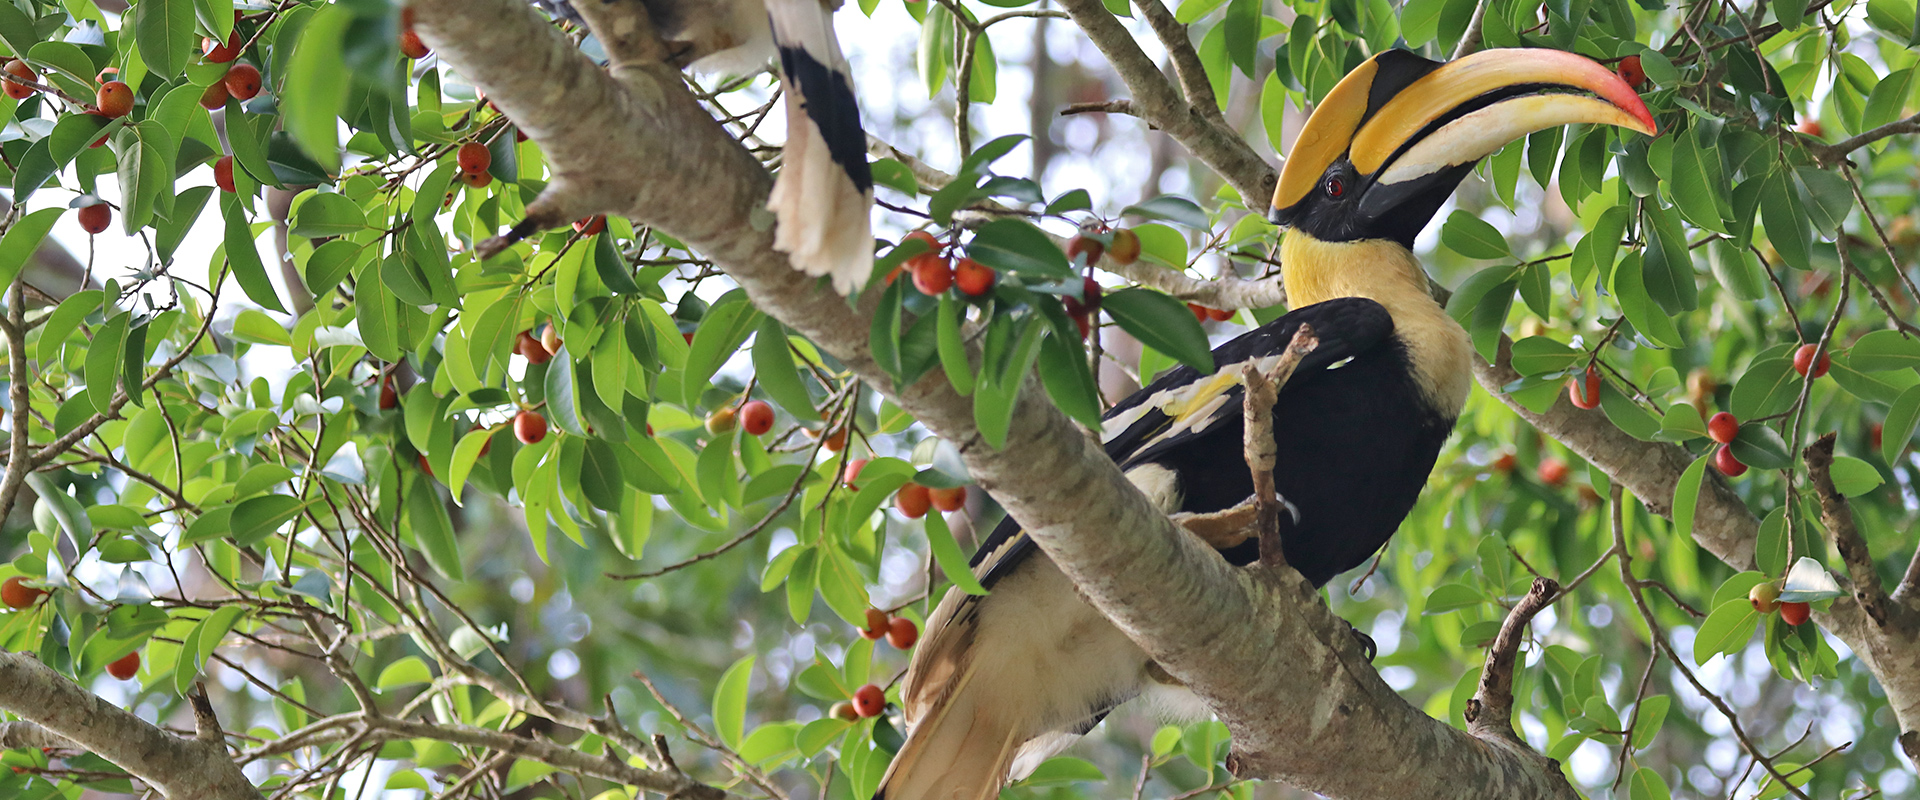 Male Great Hornbill perched on a fig tree